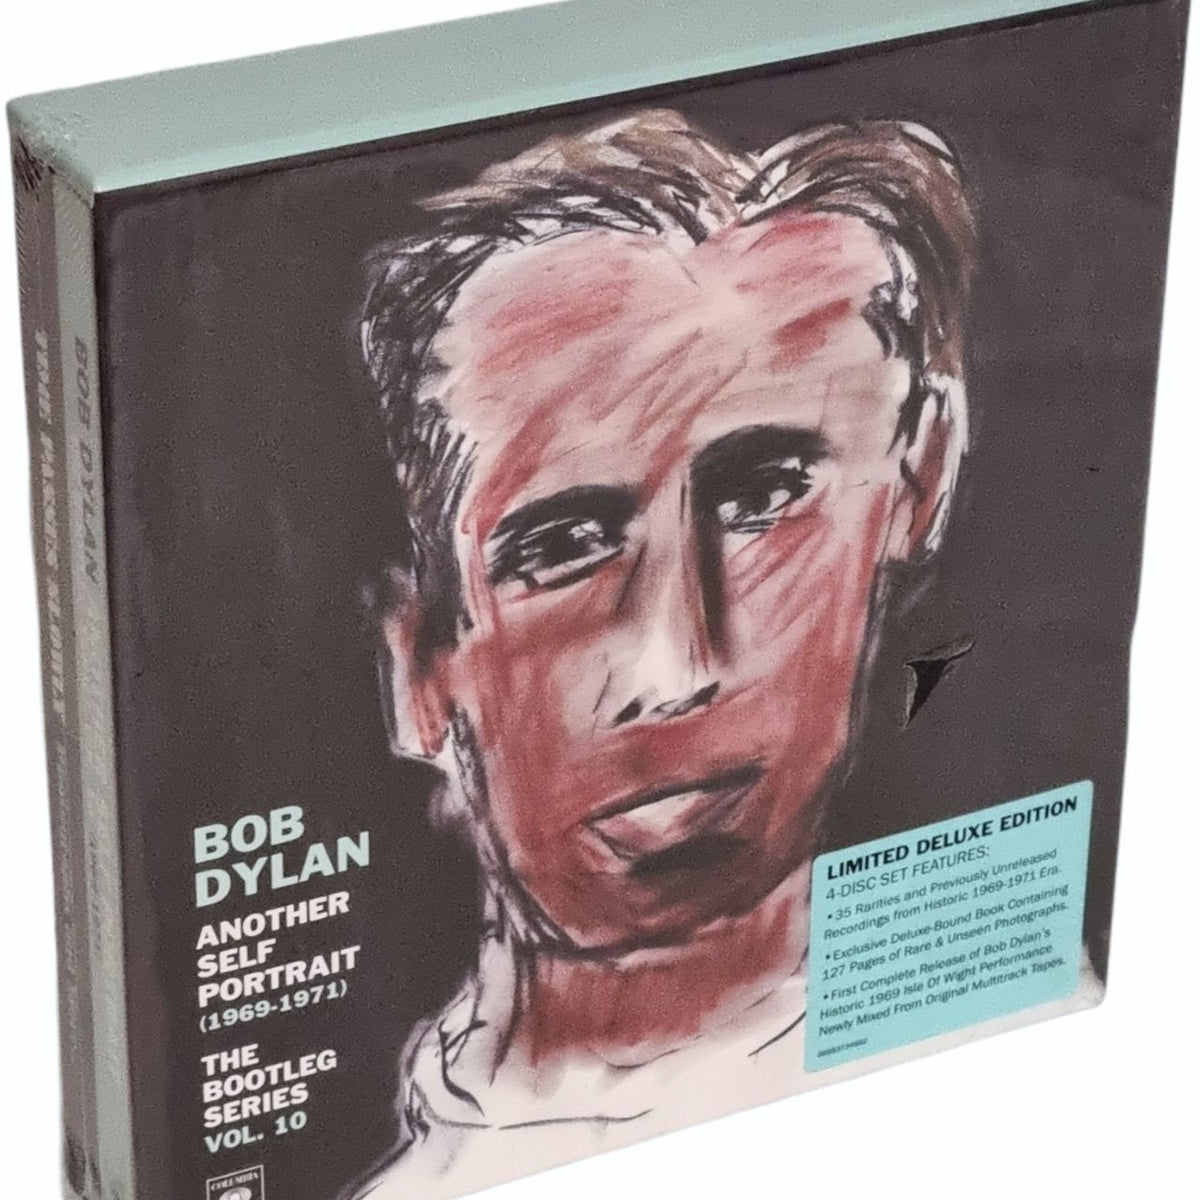 Bob Dylan Another Self Portrait (1969-1971): The Bootleg Series 